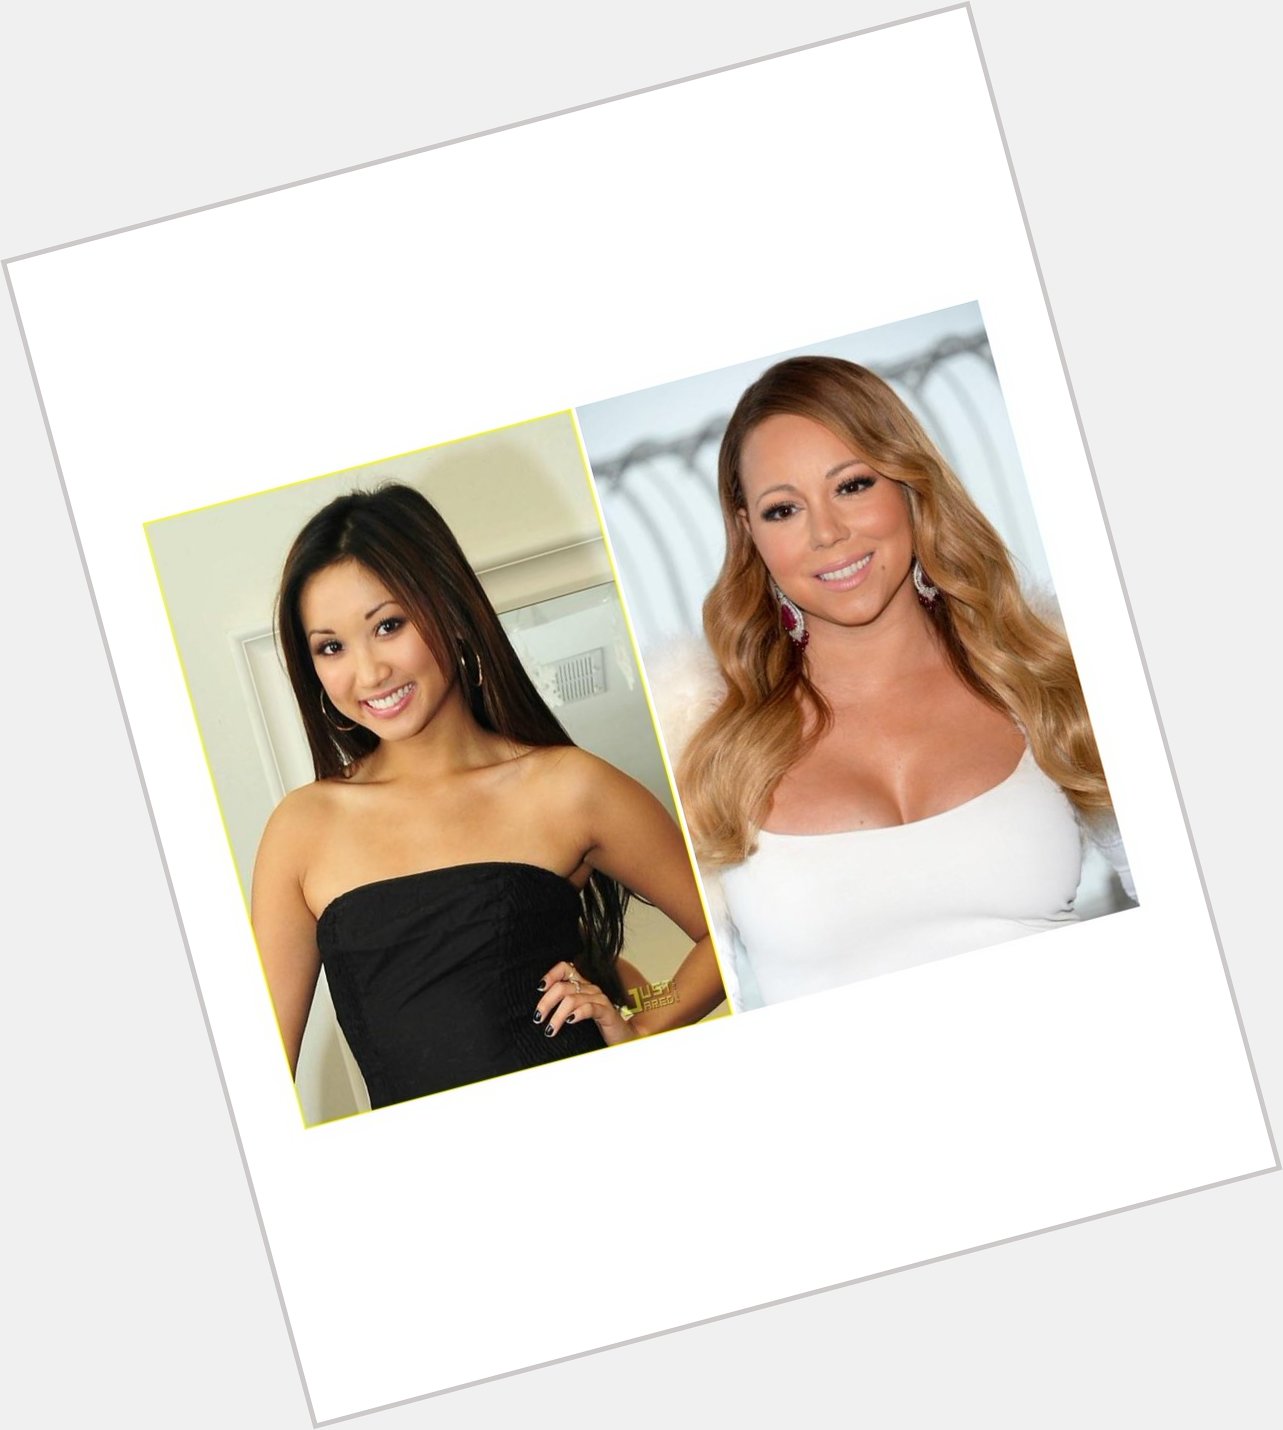   wishes Brenda Song and Mariah Carey, a very happy birthday.  